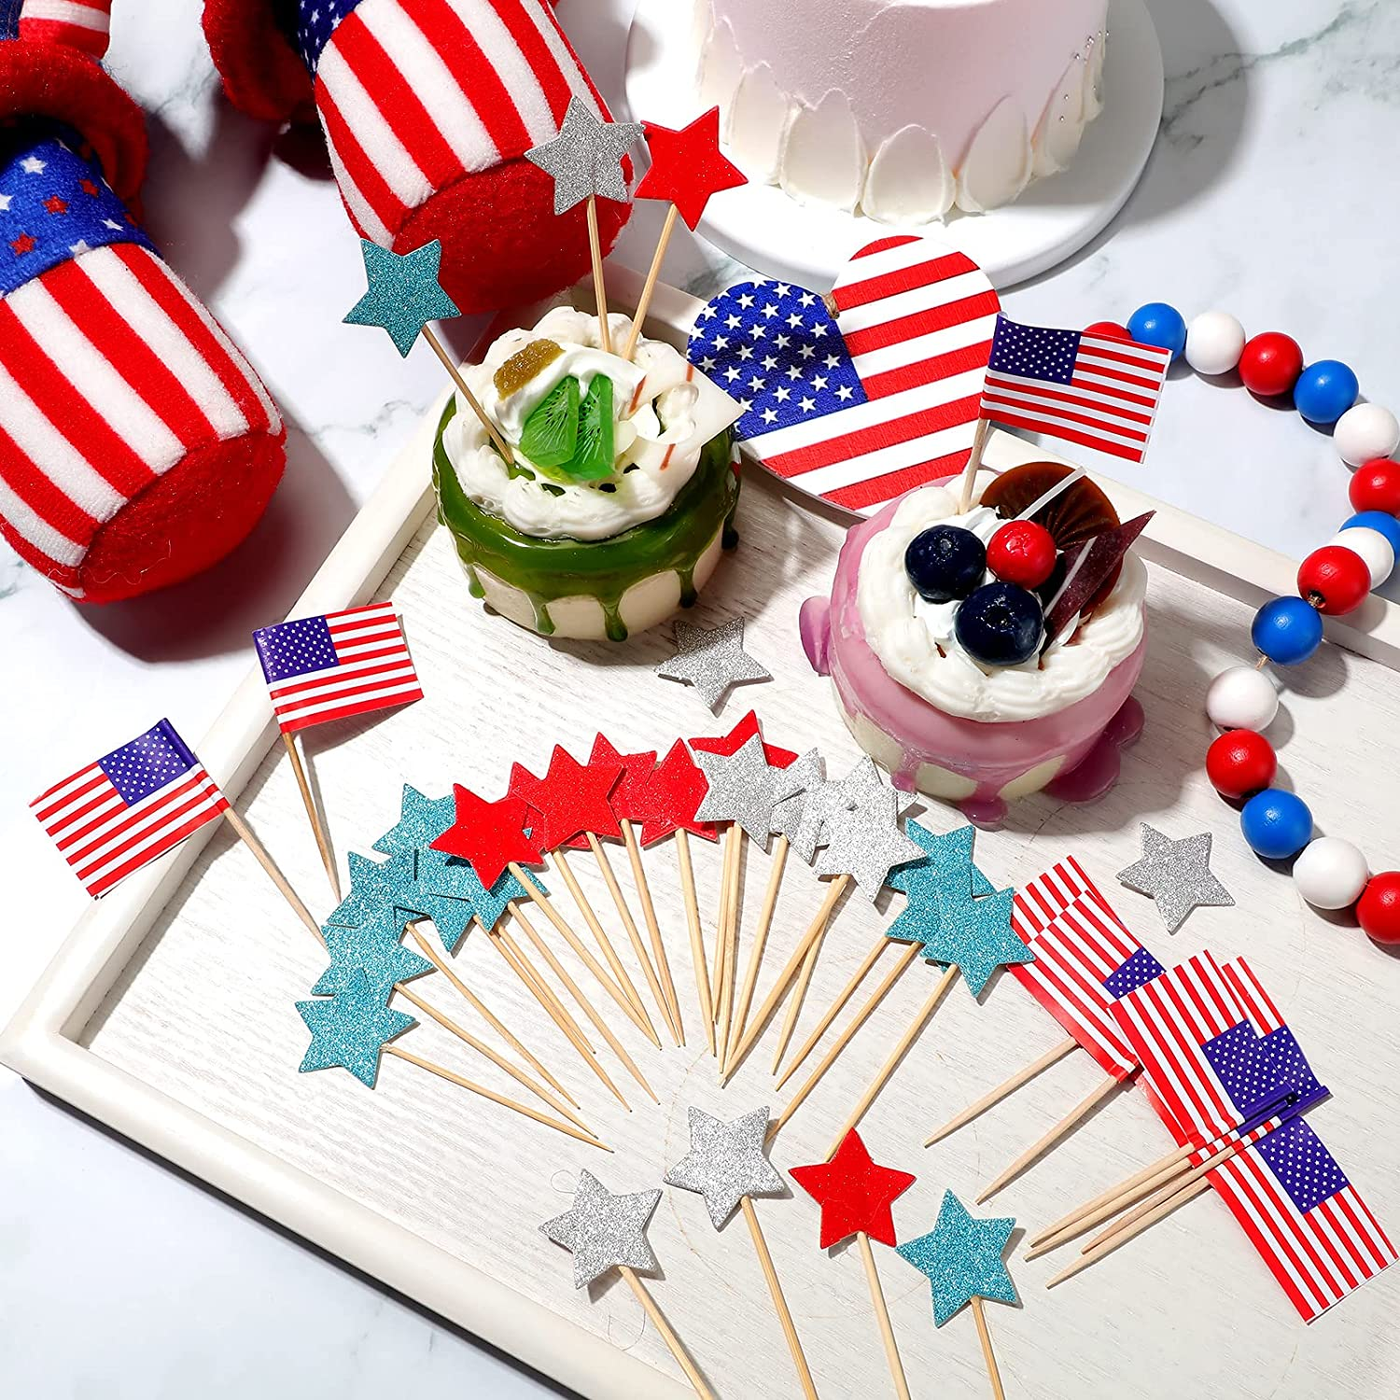 190 Pcs 4th of July Cupcake Toppers 100 American Flag Cupcake Toppers with 90 Glitter Star Cupcake Toppers